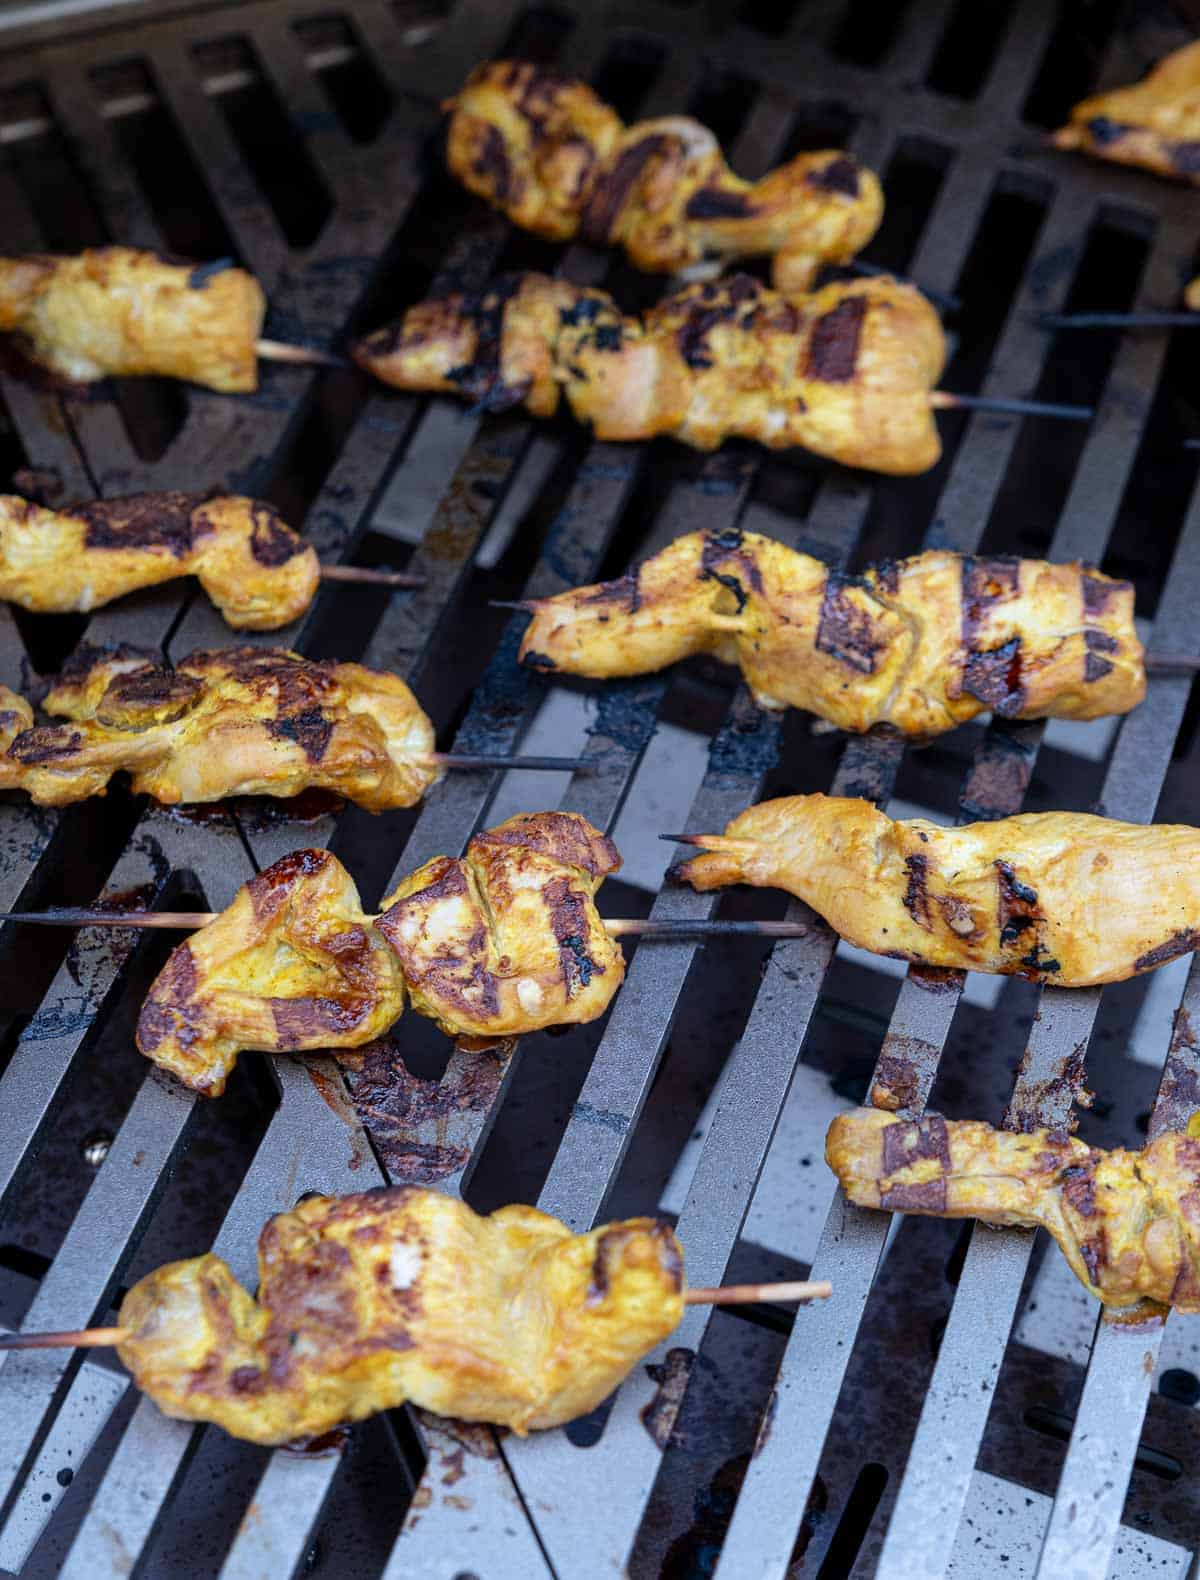 Chicken skewers on a gas grill grate over direct heat.